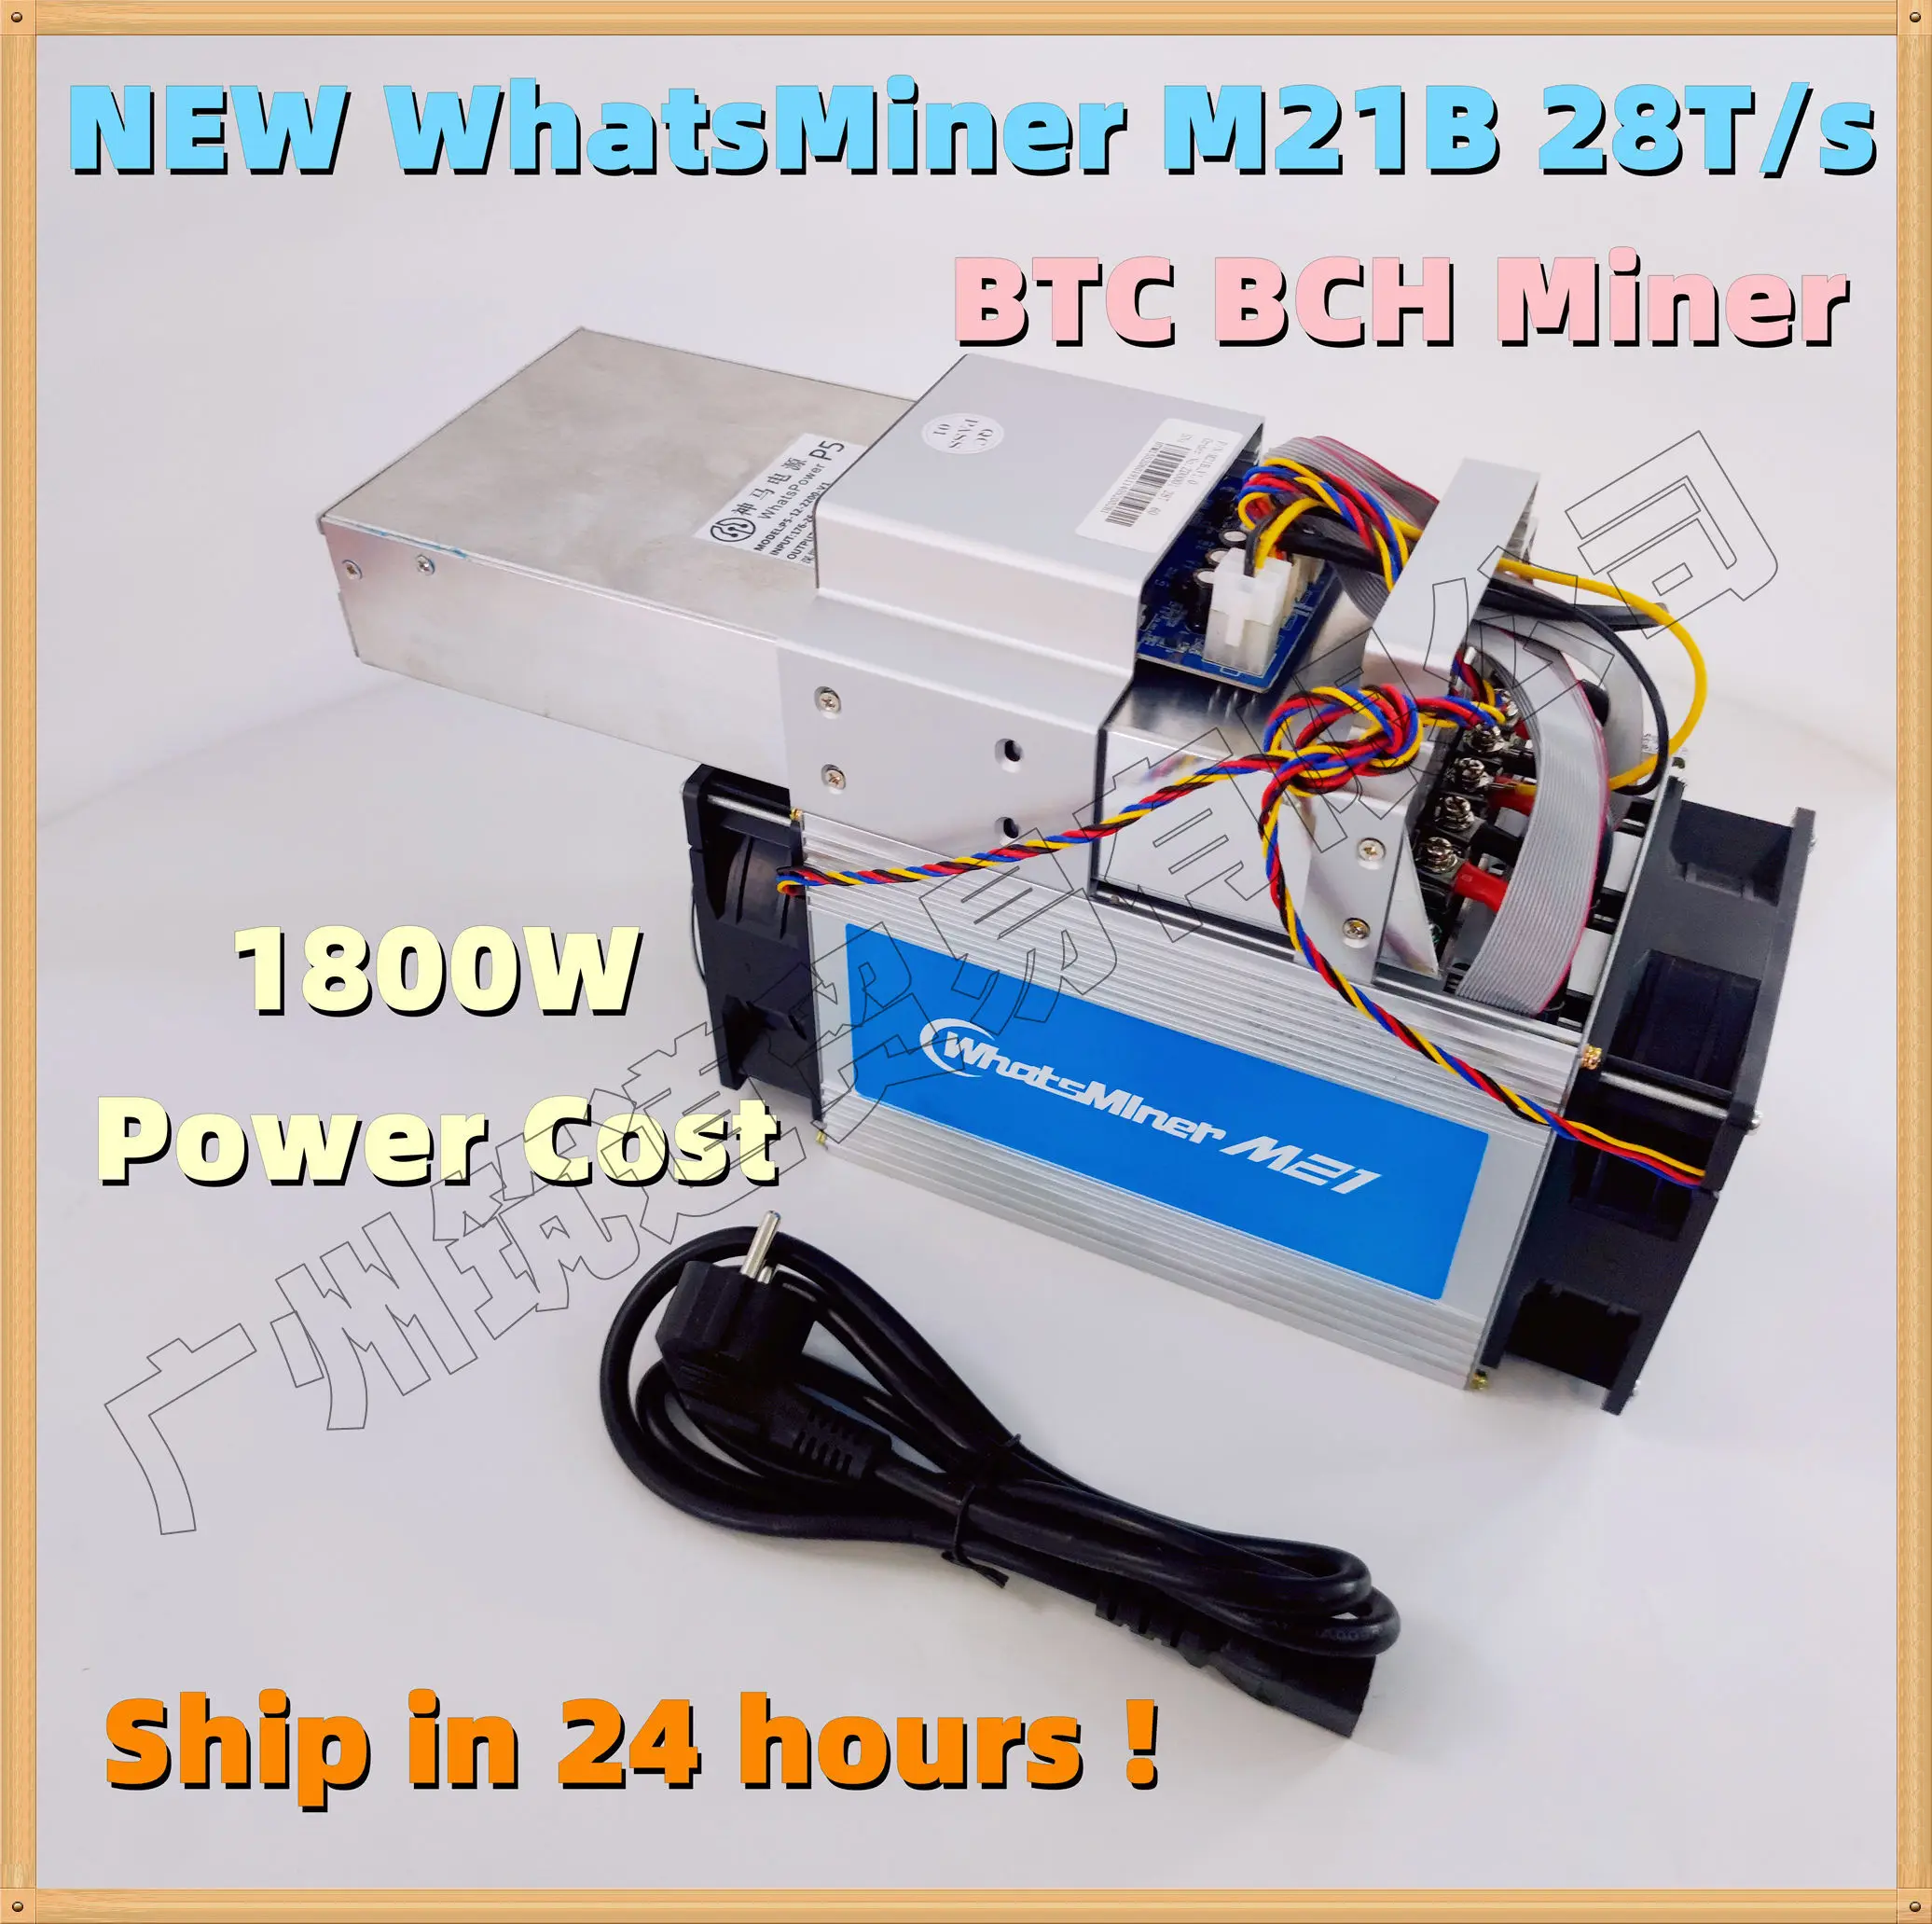 New Asic Bitcoin Miner WhatsMiner M21B 28T/S 1800W with PSU Better Than Antminer S9 T9+ Ebit E9 For BTC BCH Miner